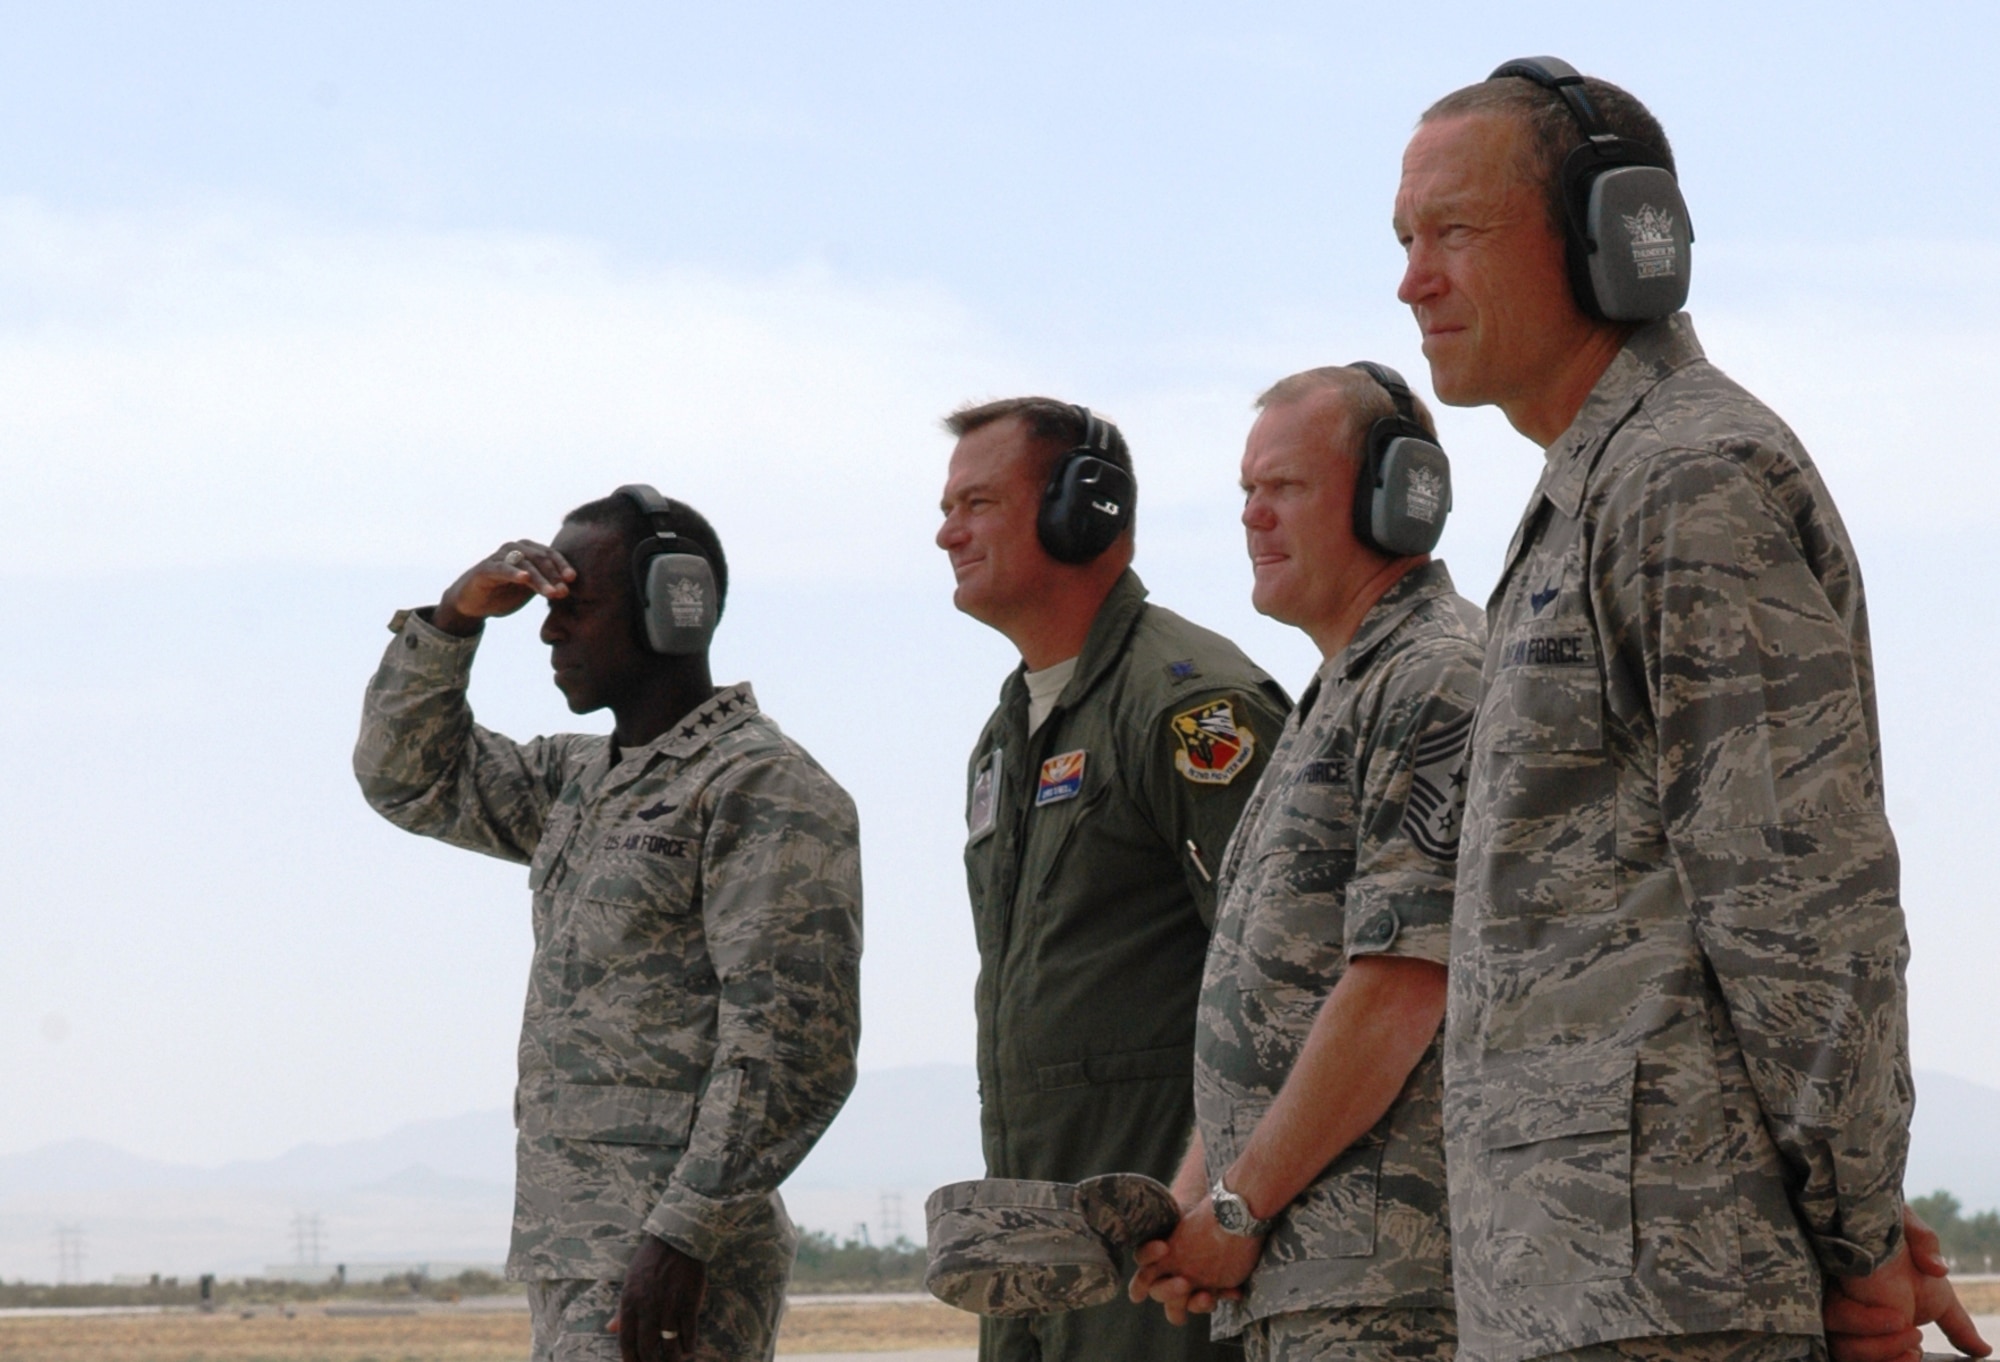 (From the left) U.S. Air Force Gen. Edward A. Rice Jr., Air Education and Training Command commander; Lt. Col. Chris O’Neill, 162nd Fighter Wing Aerospace Control Alert Detachment commander; Chief Master Sgt. James A. Cody, AETC command chief master sergeant; and Brig. Gen. Paul L. Ayers, Air National Guard assistant to the AETC commander, watch Arizona Air National Guard F-16 Fighting Falcons scramble from the 162nd's Alert Detachment at Davis-Monthan Air Force Base, Ariz. The wing’s role in homeland defense is unique for a fighter training unit. (U.S. Air Force photo by 1st Lt. Angela Walz)